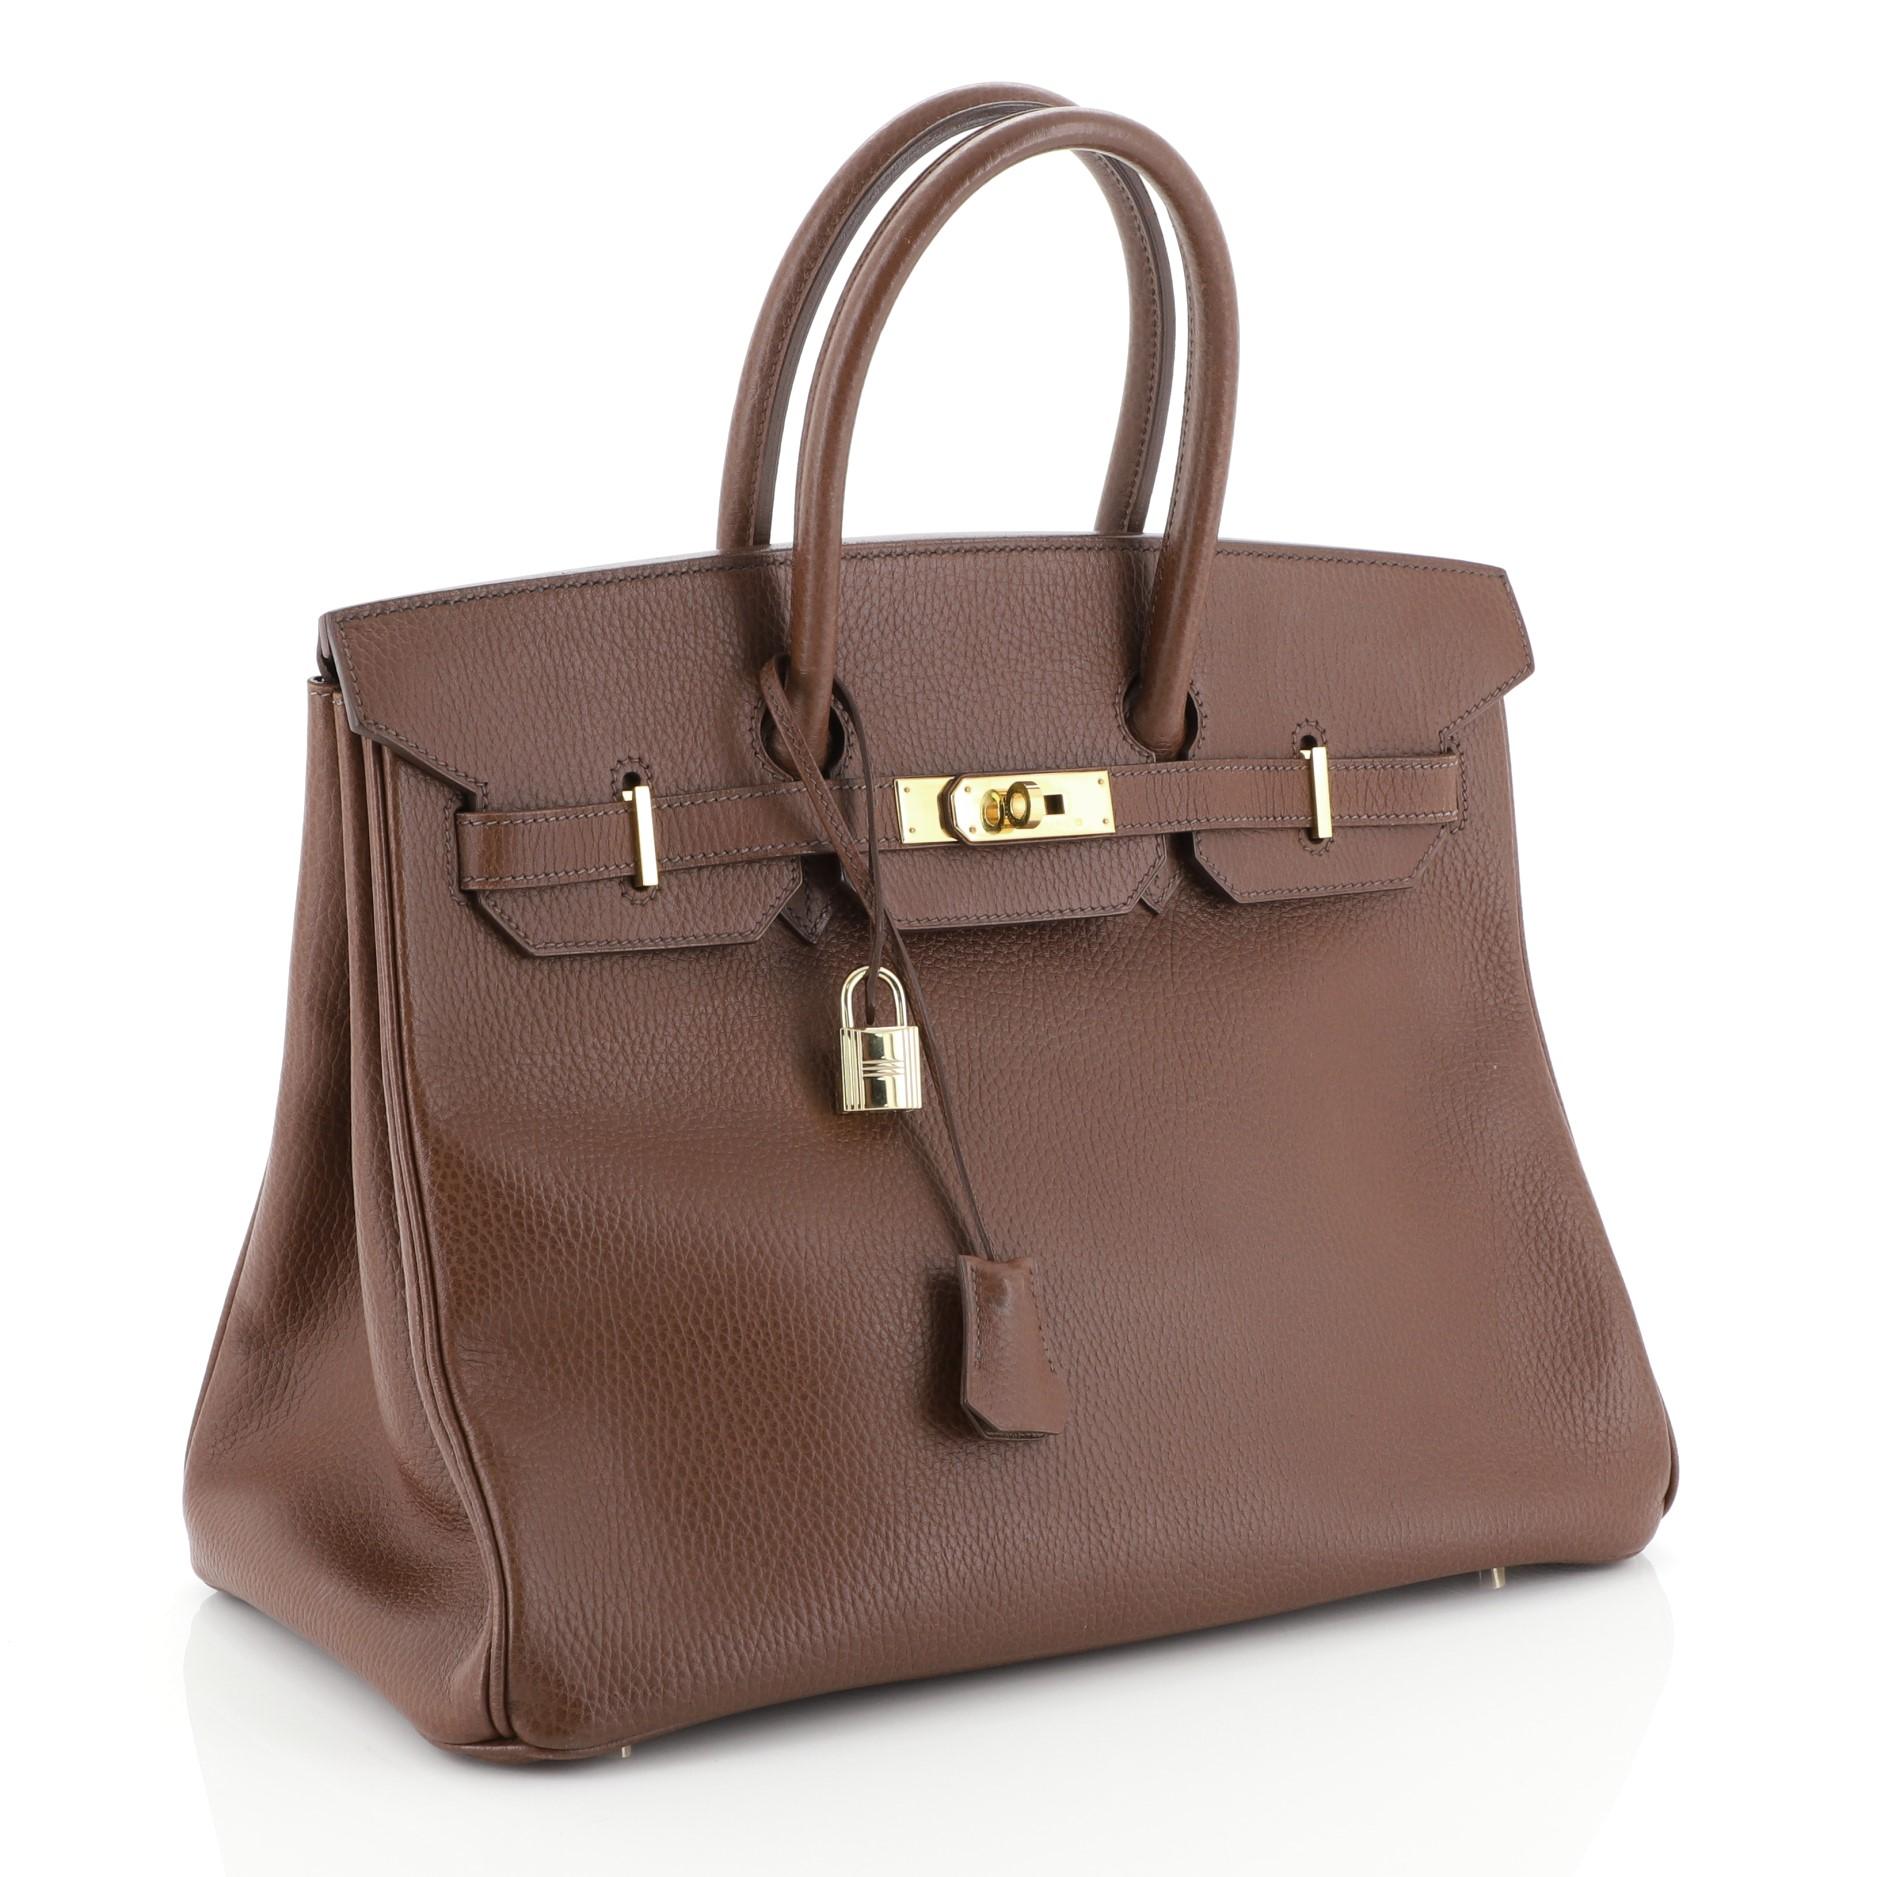 This Hermes Birkin Handbag Marron Fonce Ardennes with Gold Hardware 35, crafted in Marron Fonce brown Ardennes leather, features dual rolled handles, frontal flap, and gold hardware. Its turn-lock closure opens to a Marron Fonce brown Chevre leather